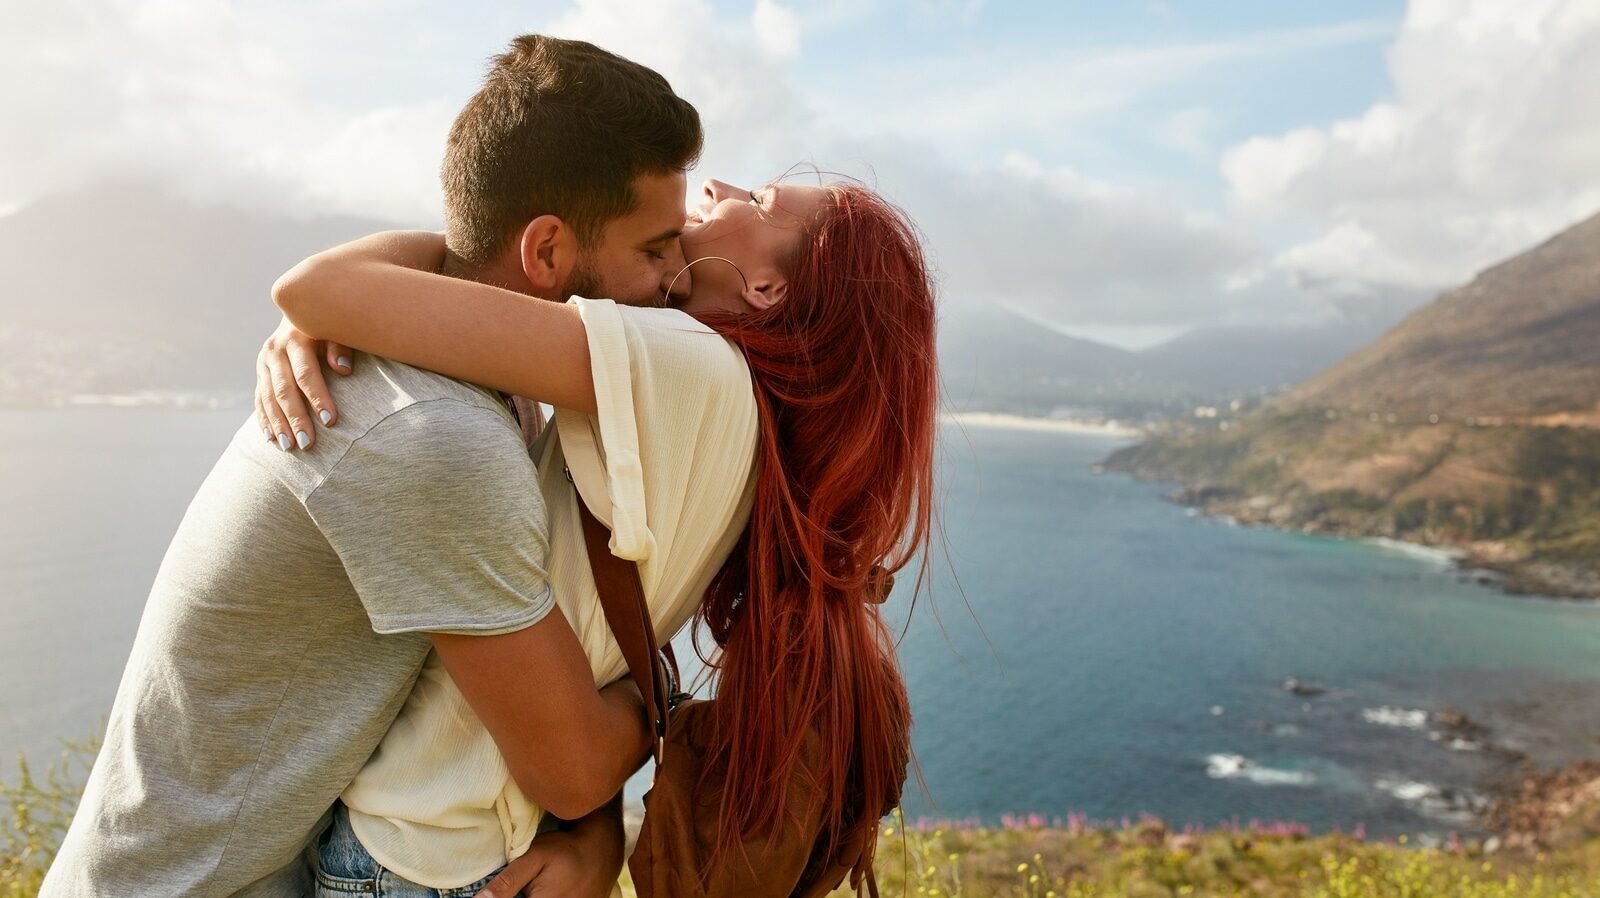 Loving young couple embracing and kissing on a summer day outdoors. Man hugging his girlfriend. Enjoying their summer vacation.